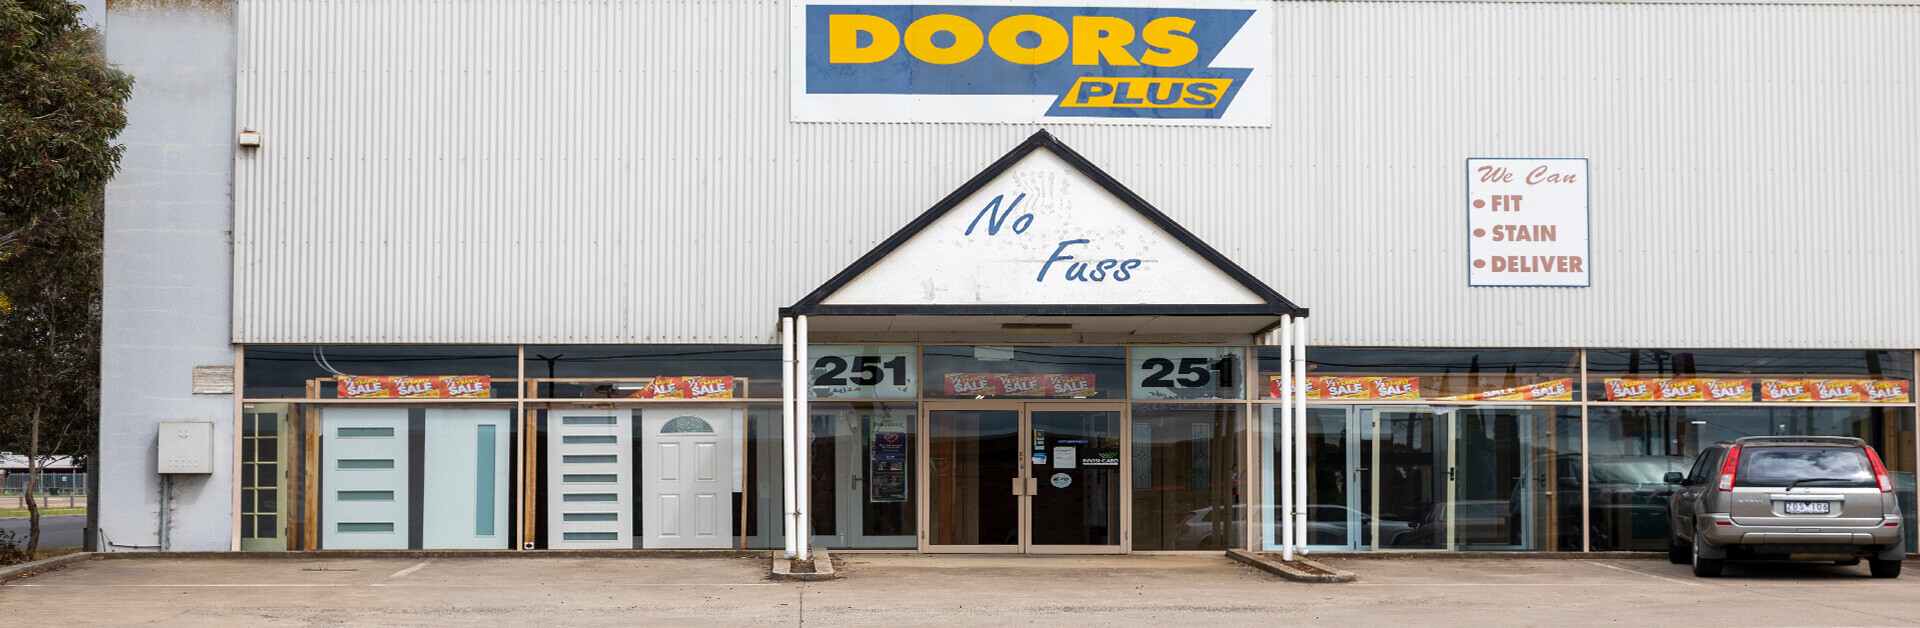 Doors Plus Geelong Store in Victoria, Melbourne with Car park